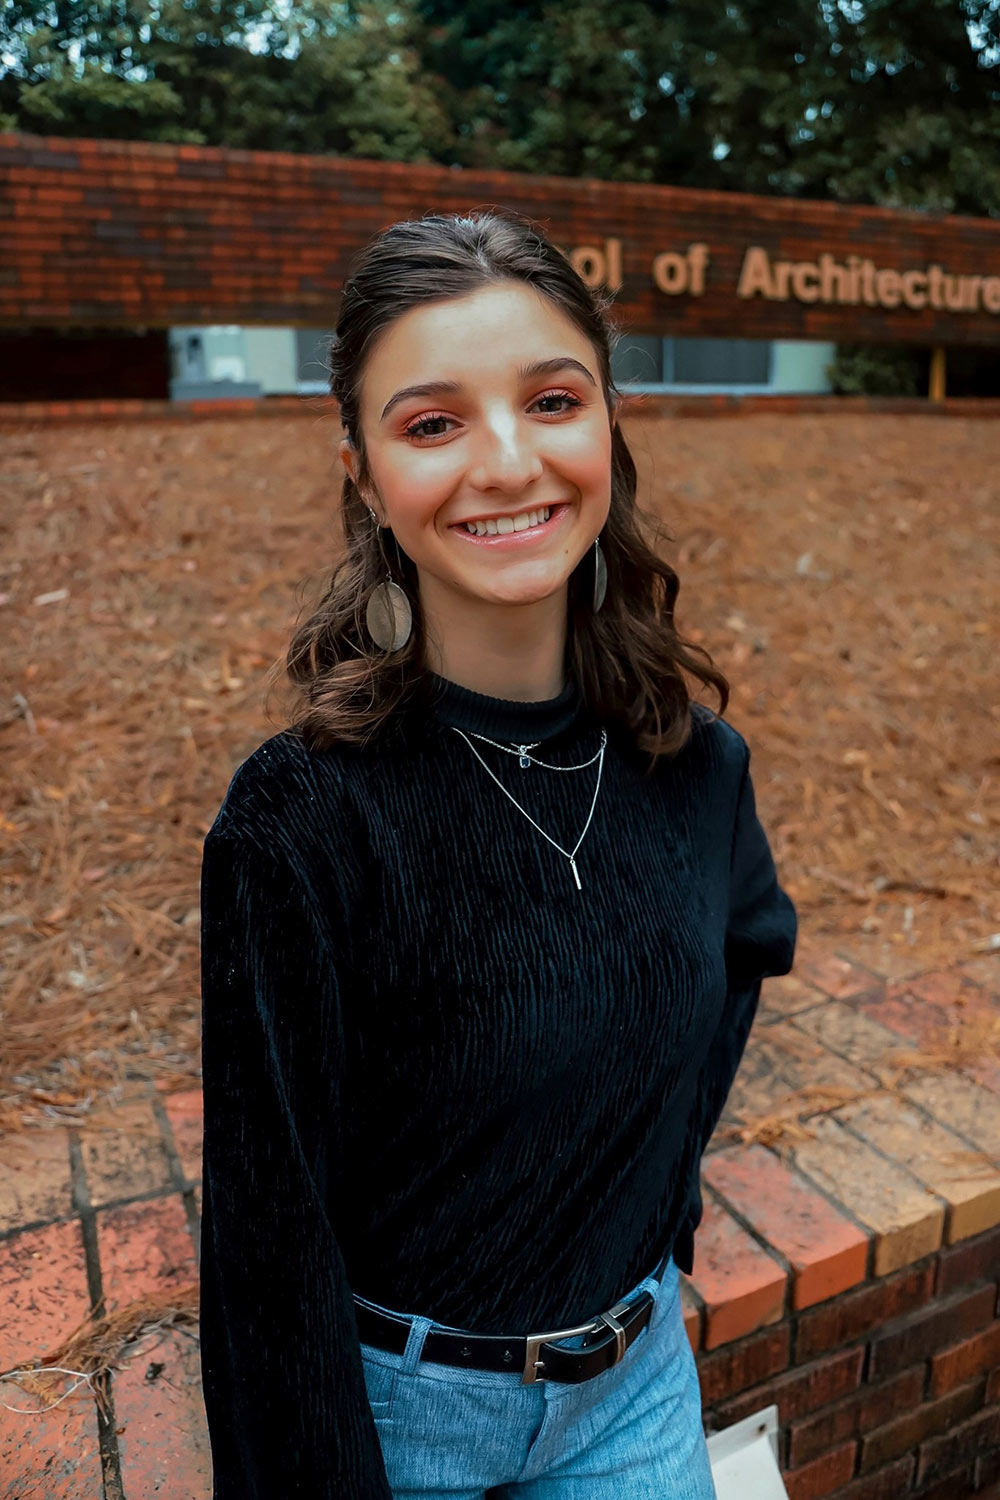 Annelise Sernich poses in front of the "Architecture" sign outside of Giles Hall at Mississippi State University